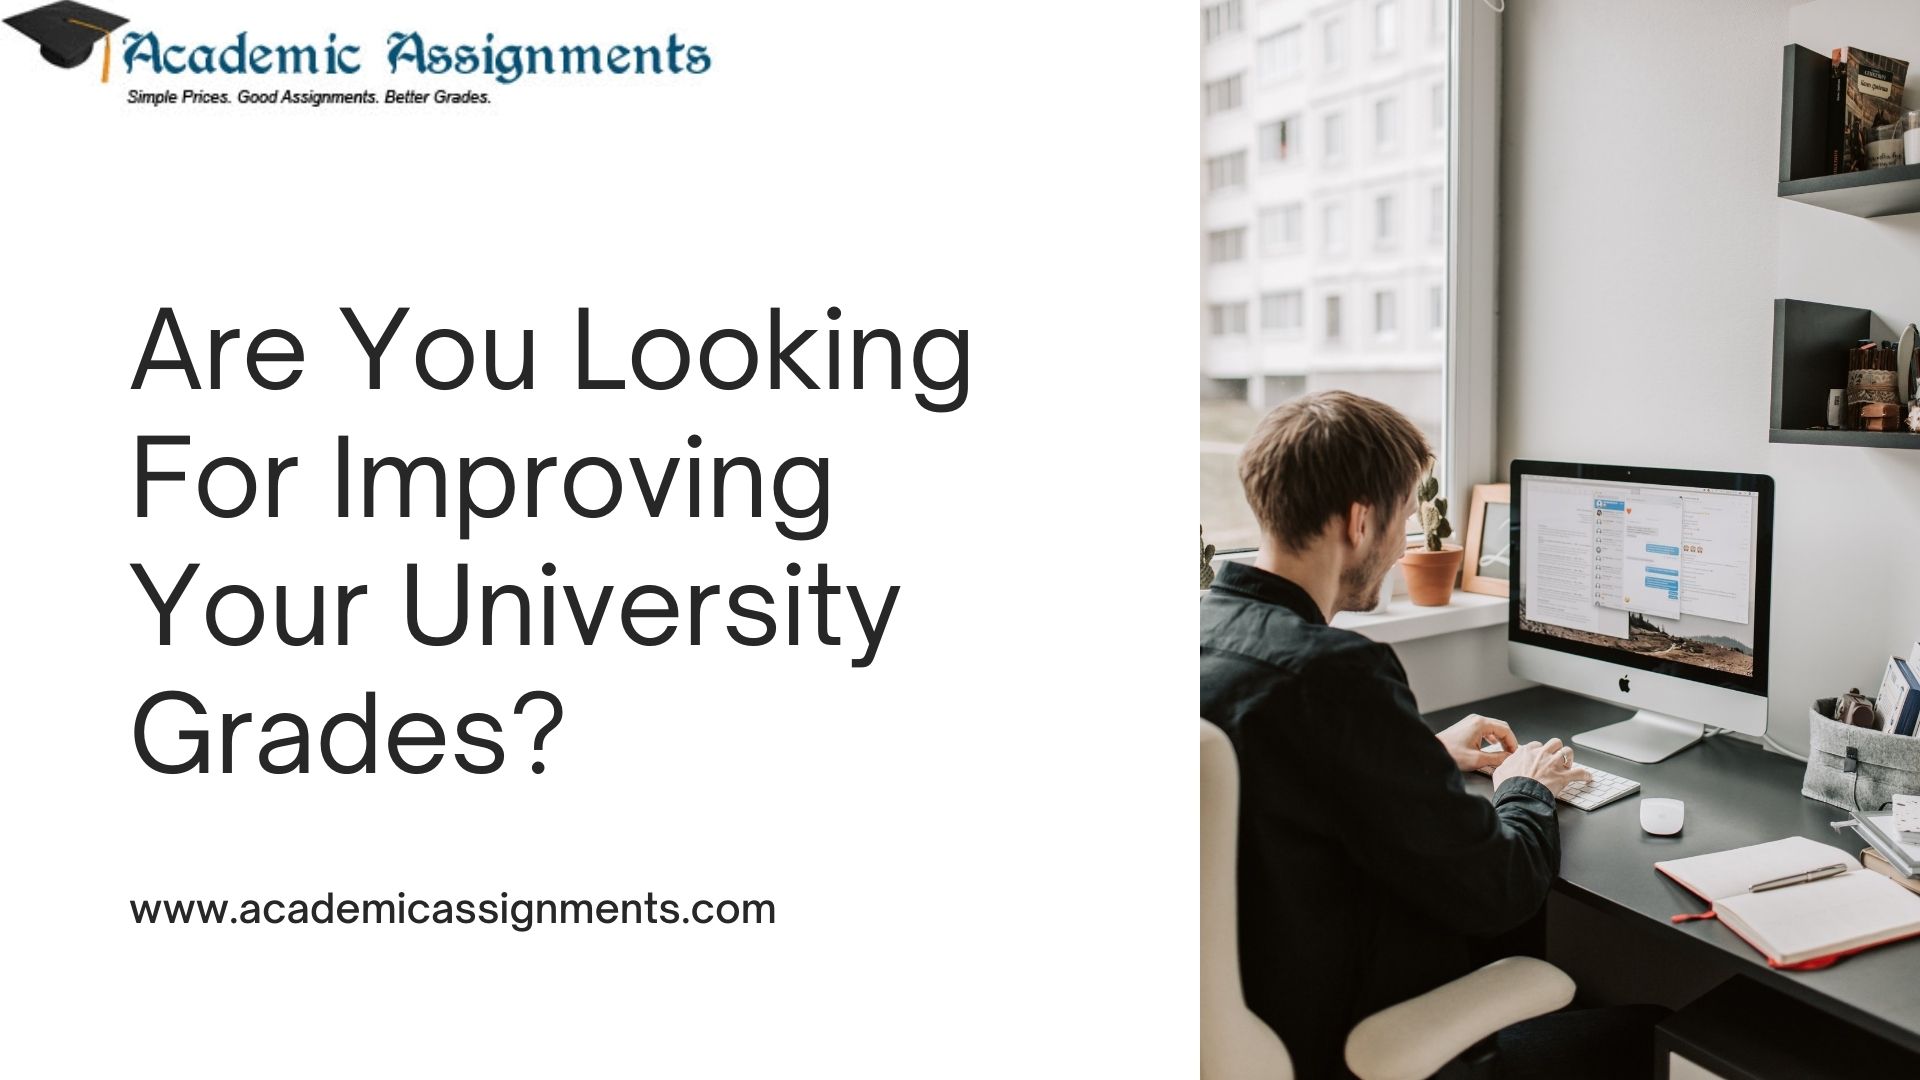 Are You Looking For Improving Your University Grades